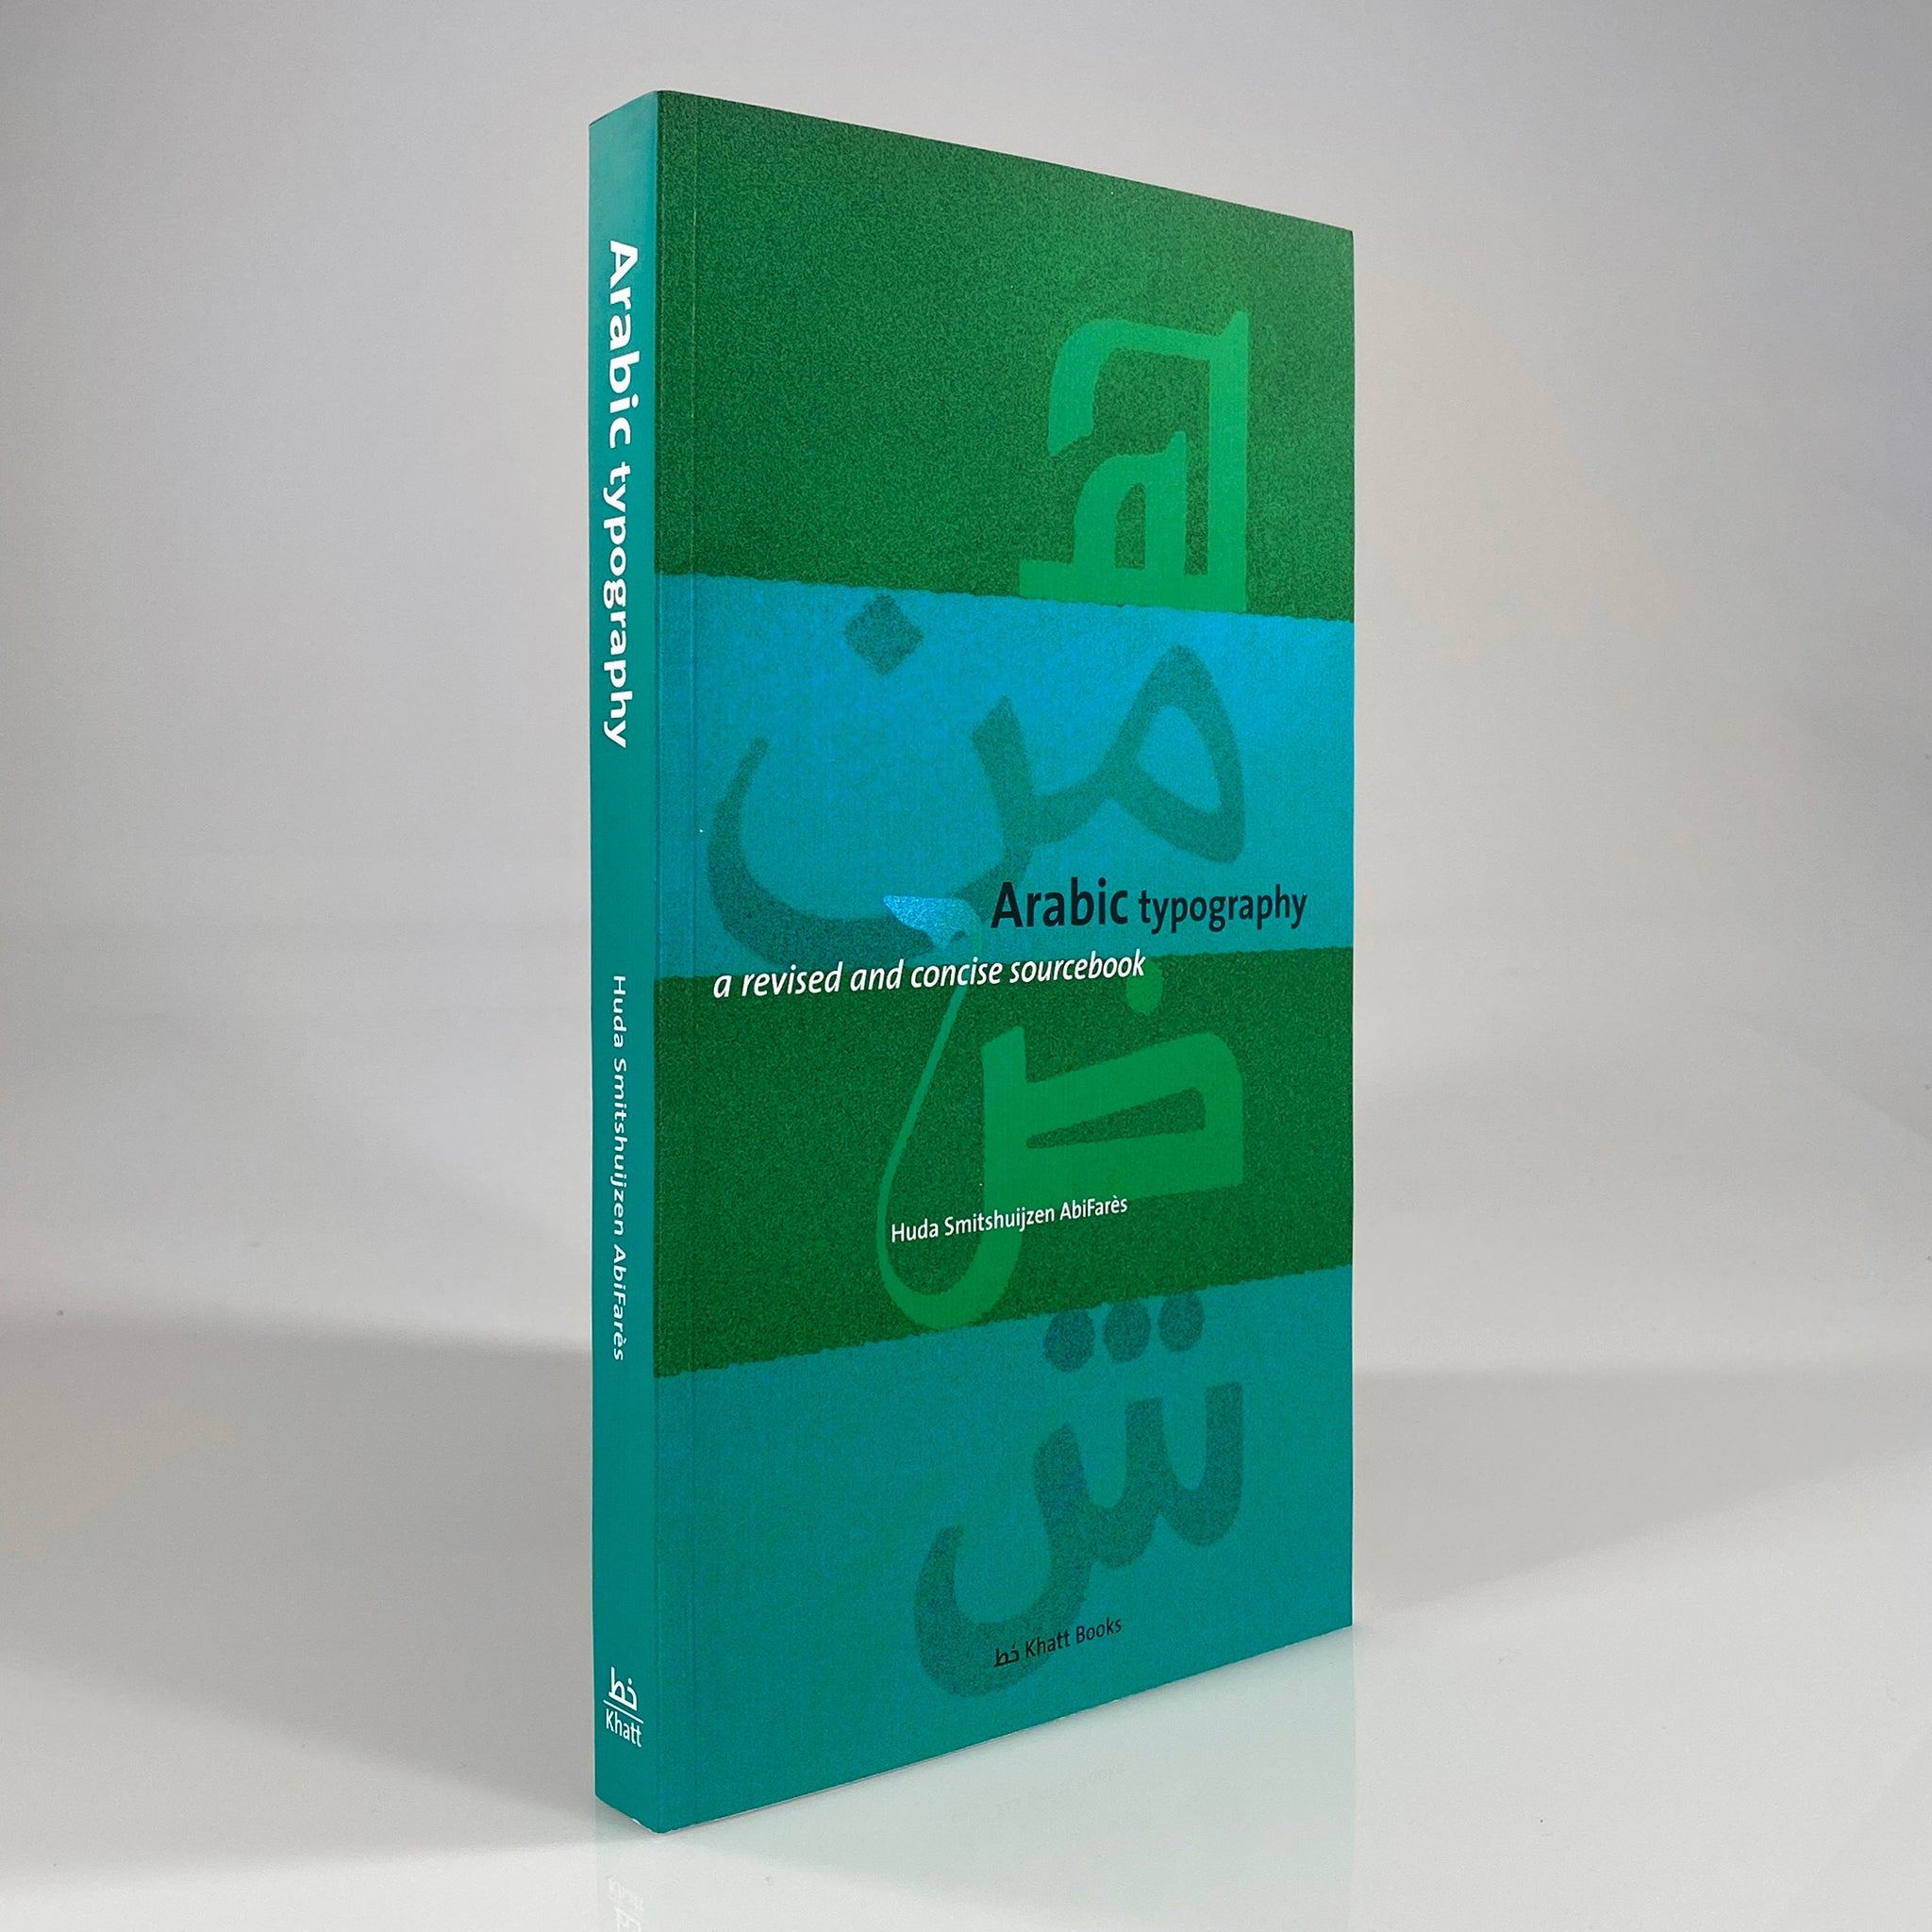 Arabic Typography: A Revised and Concise Sourcebook